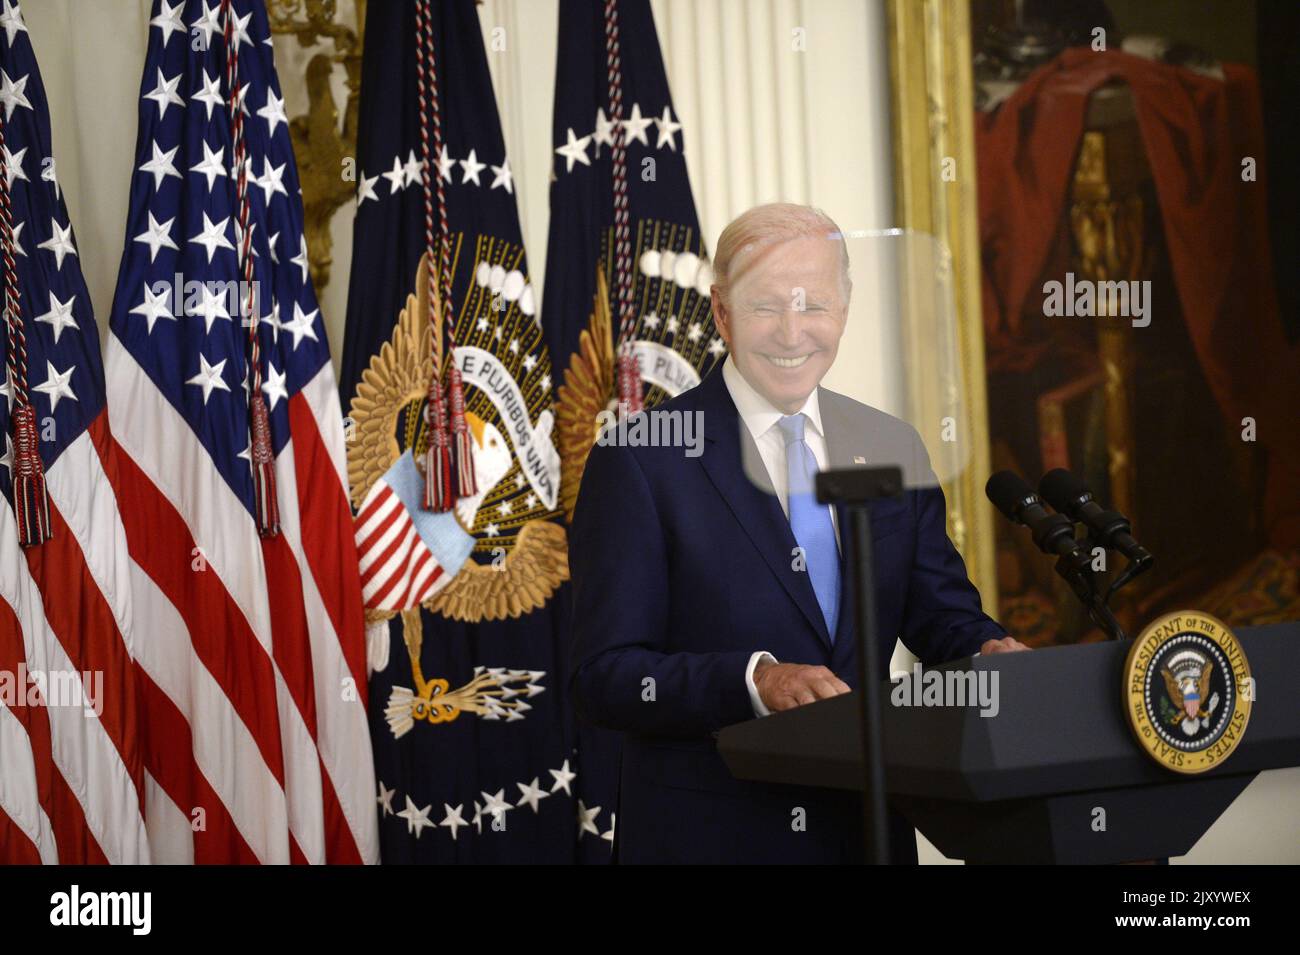 Washington, United States. 07th Sep, 2022. President Joe Biden smiles during a portrait unveiling ceremony for Former President Barack Obama and former First Lady Michelle Obama in the East Room of the White House in Washington, DC on Wednesday, September 7, 2022. Photo by Bonnie Cash/UPI Credit: UPI/Alamy Live News Stock Photo